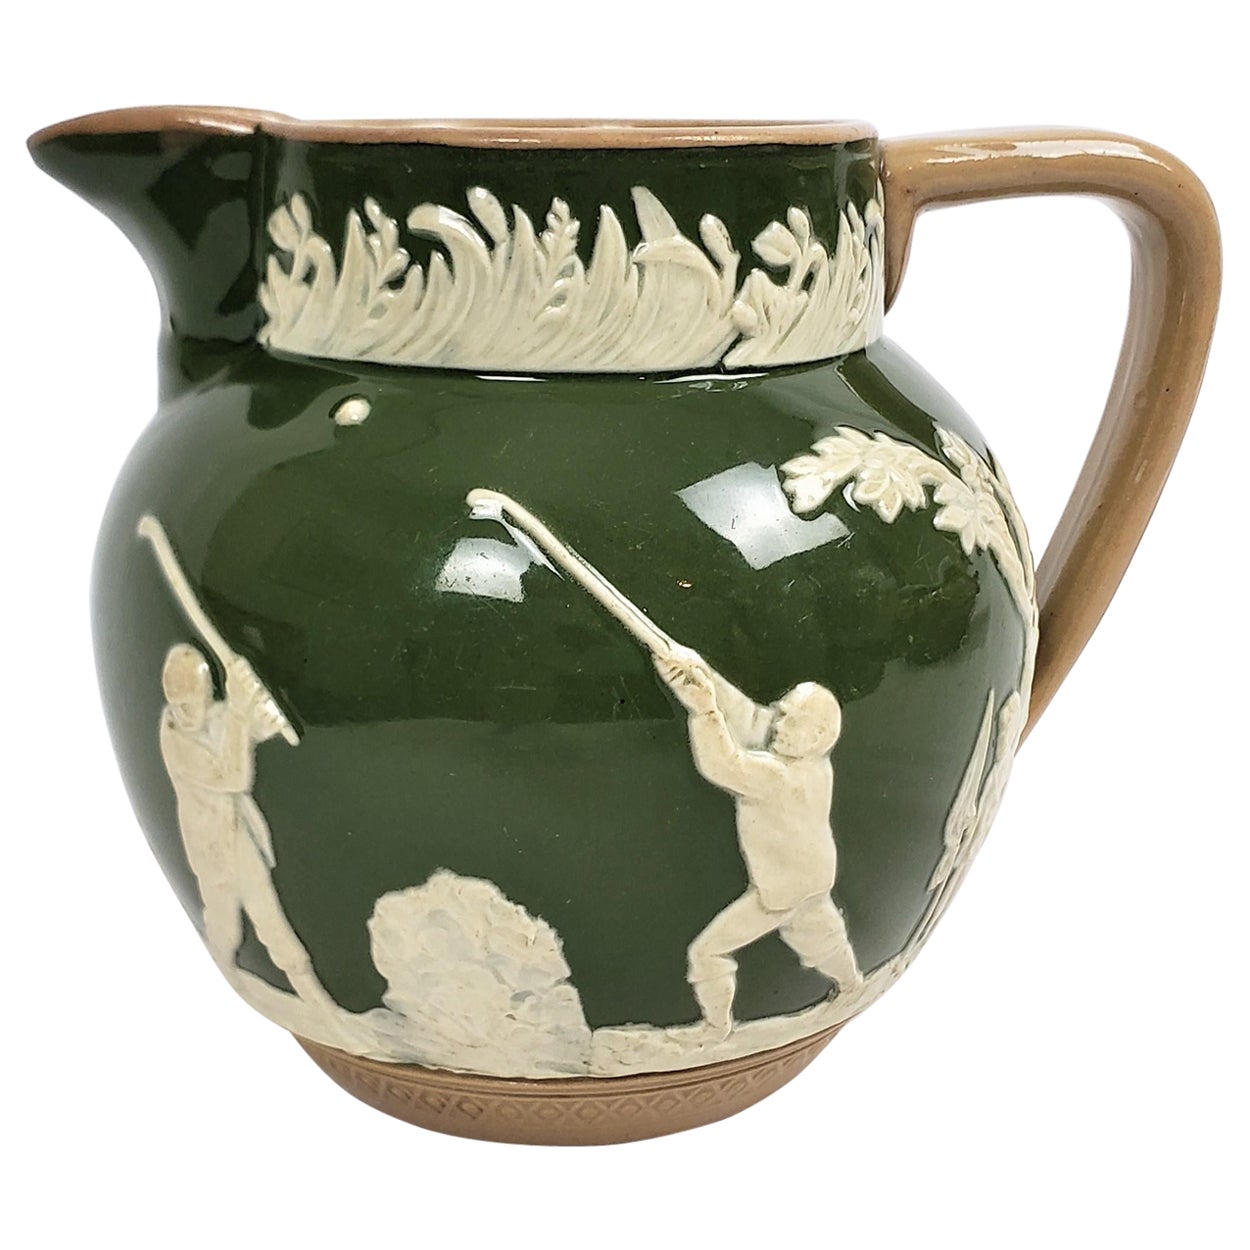 Antique Copeland Spode Pottery Pitcher with Golfing Scenes